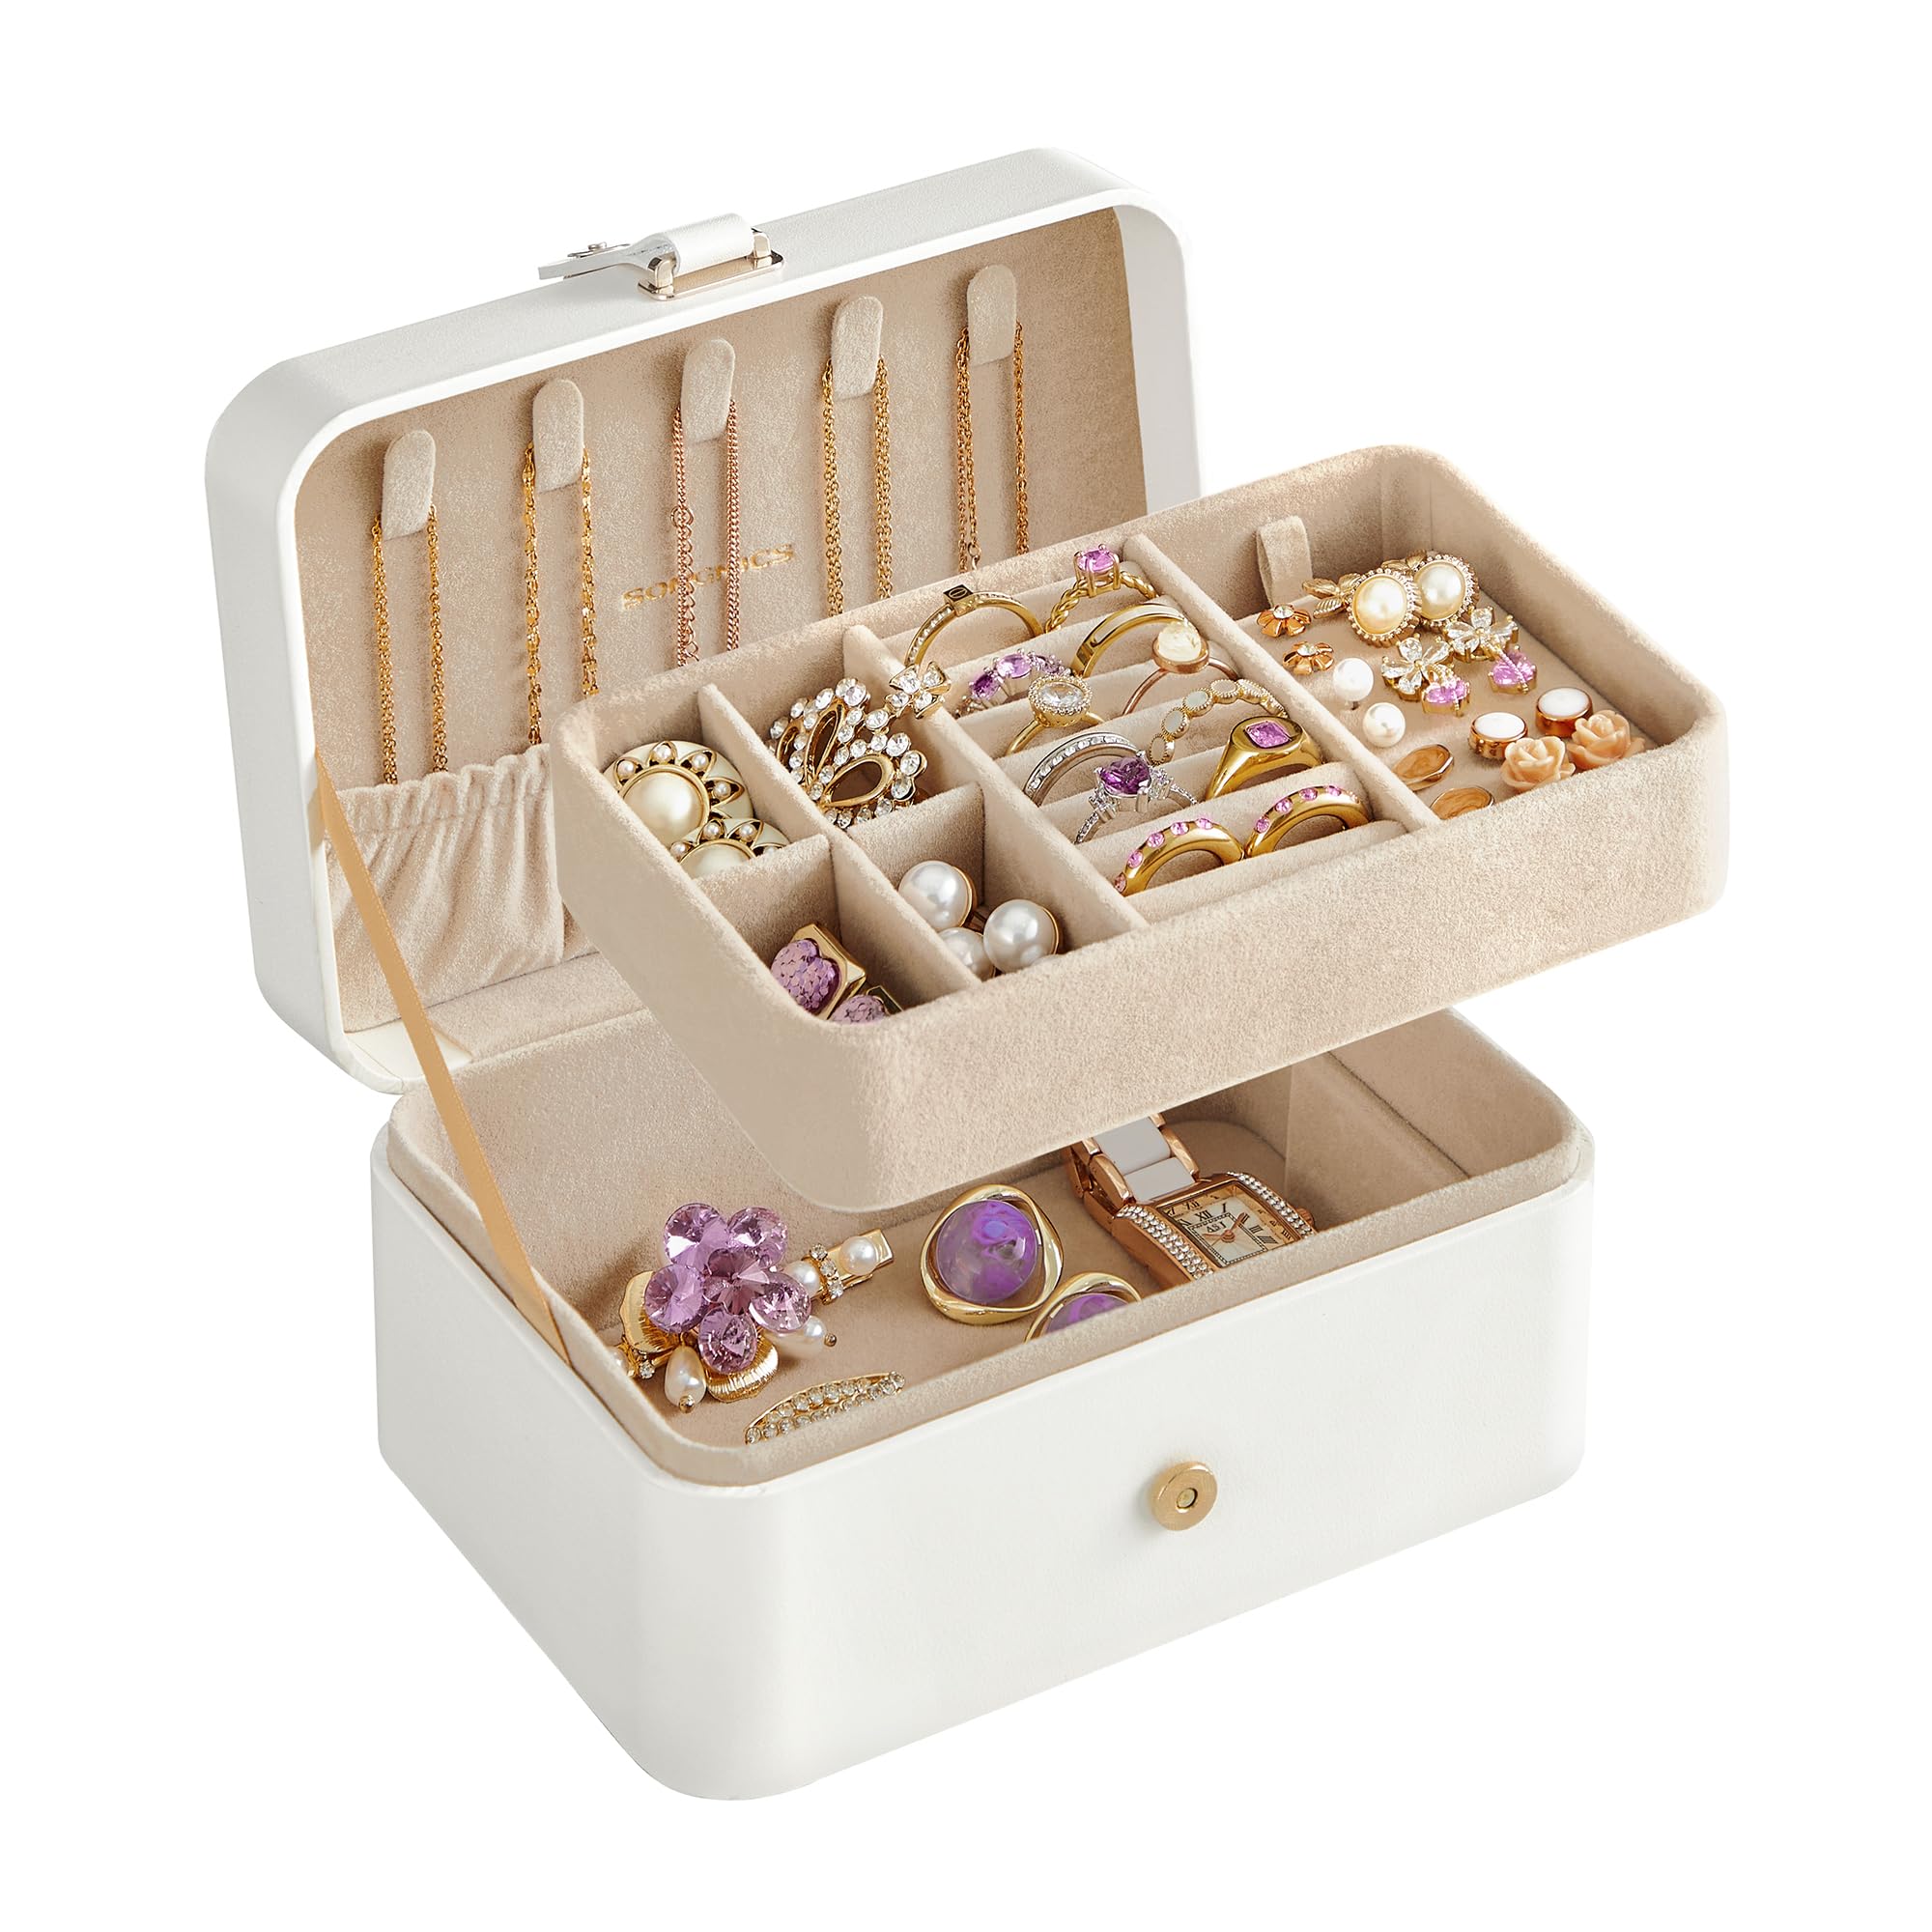 SONGMICS Jewelry Box, Travel Jewelry Case, 2-Layer Jewelry Holder Organizer, 4.3 x 6.3 x 3.1 Inches, Portable, Versatile Earring Storage, for Larger Accessories, Gift Idea, Cloud White UJBC166W01